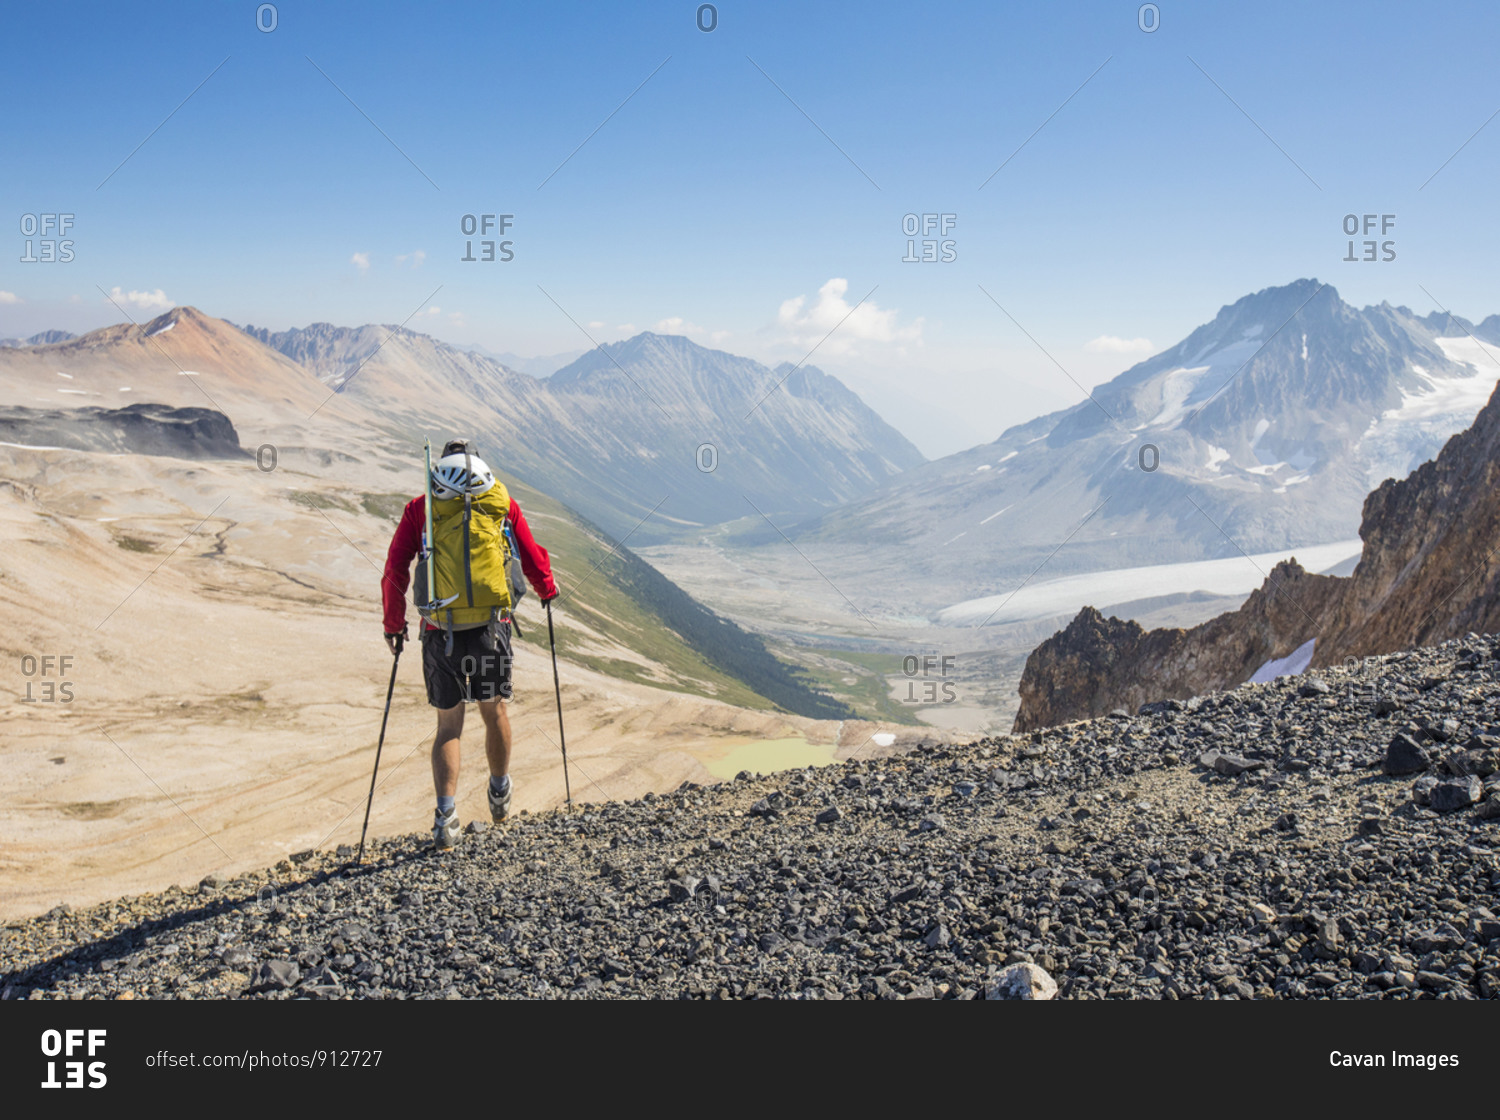 Rear view of male backpacker in high mountains.